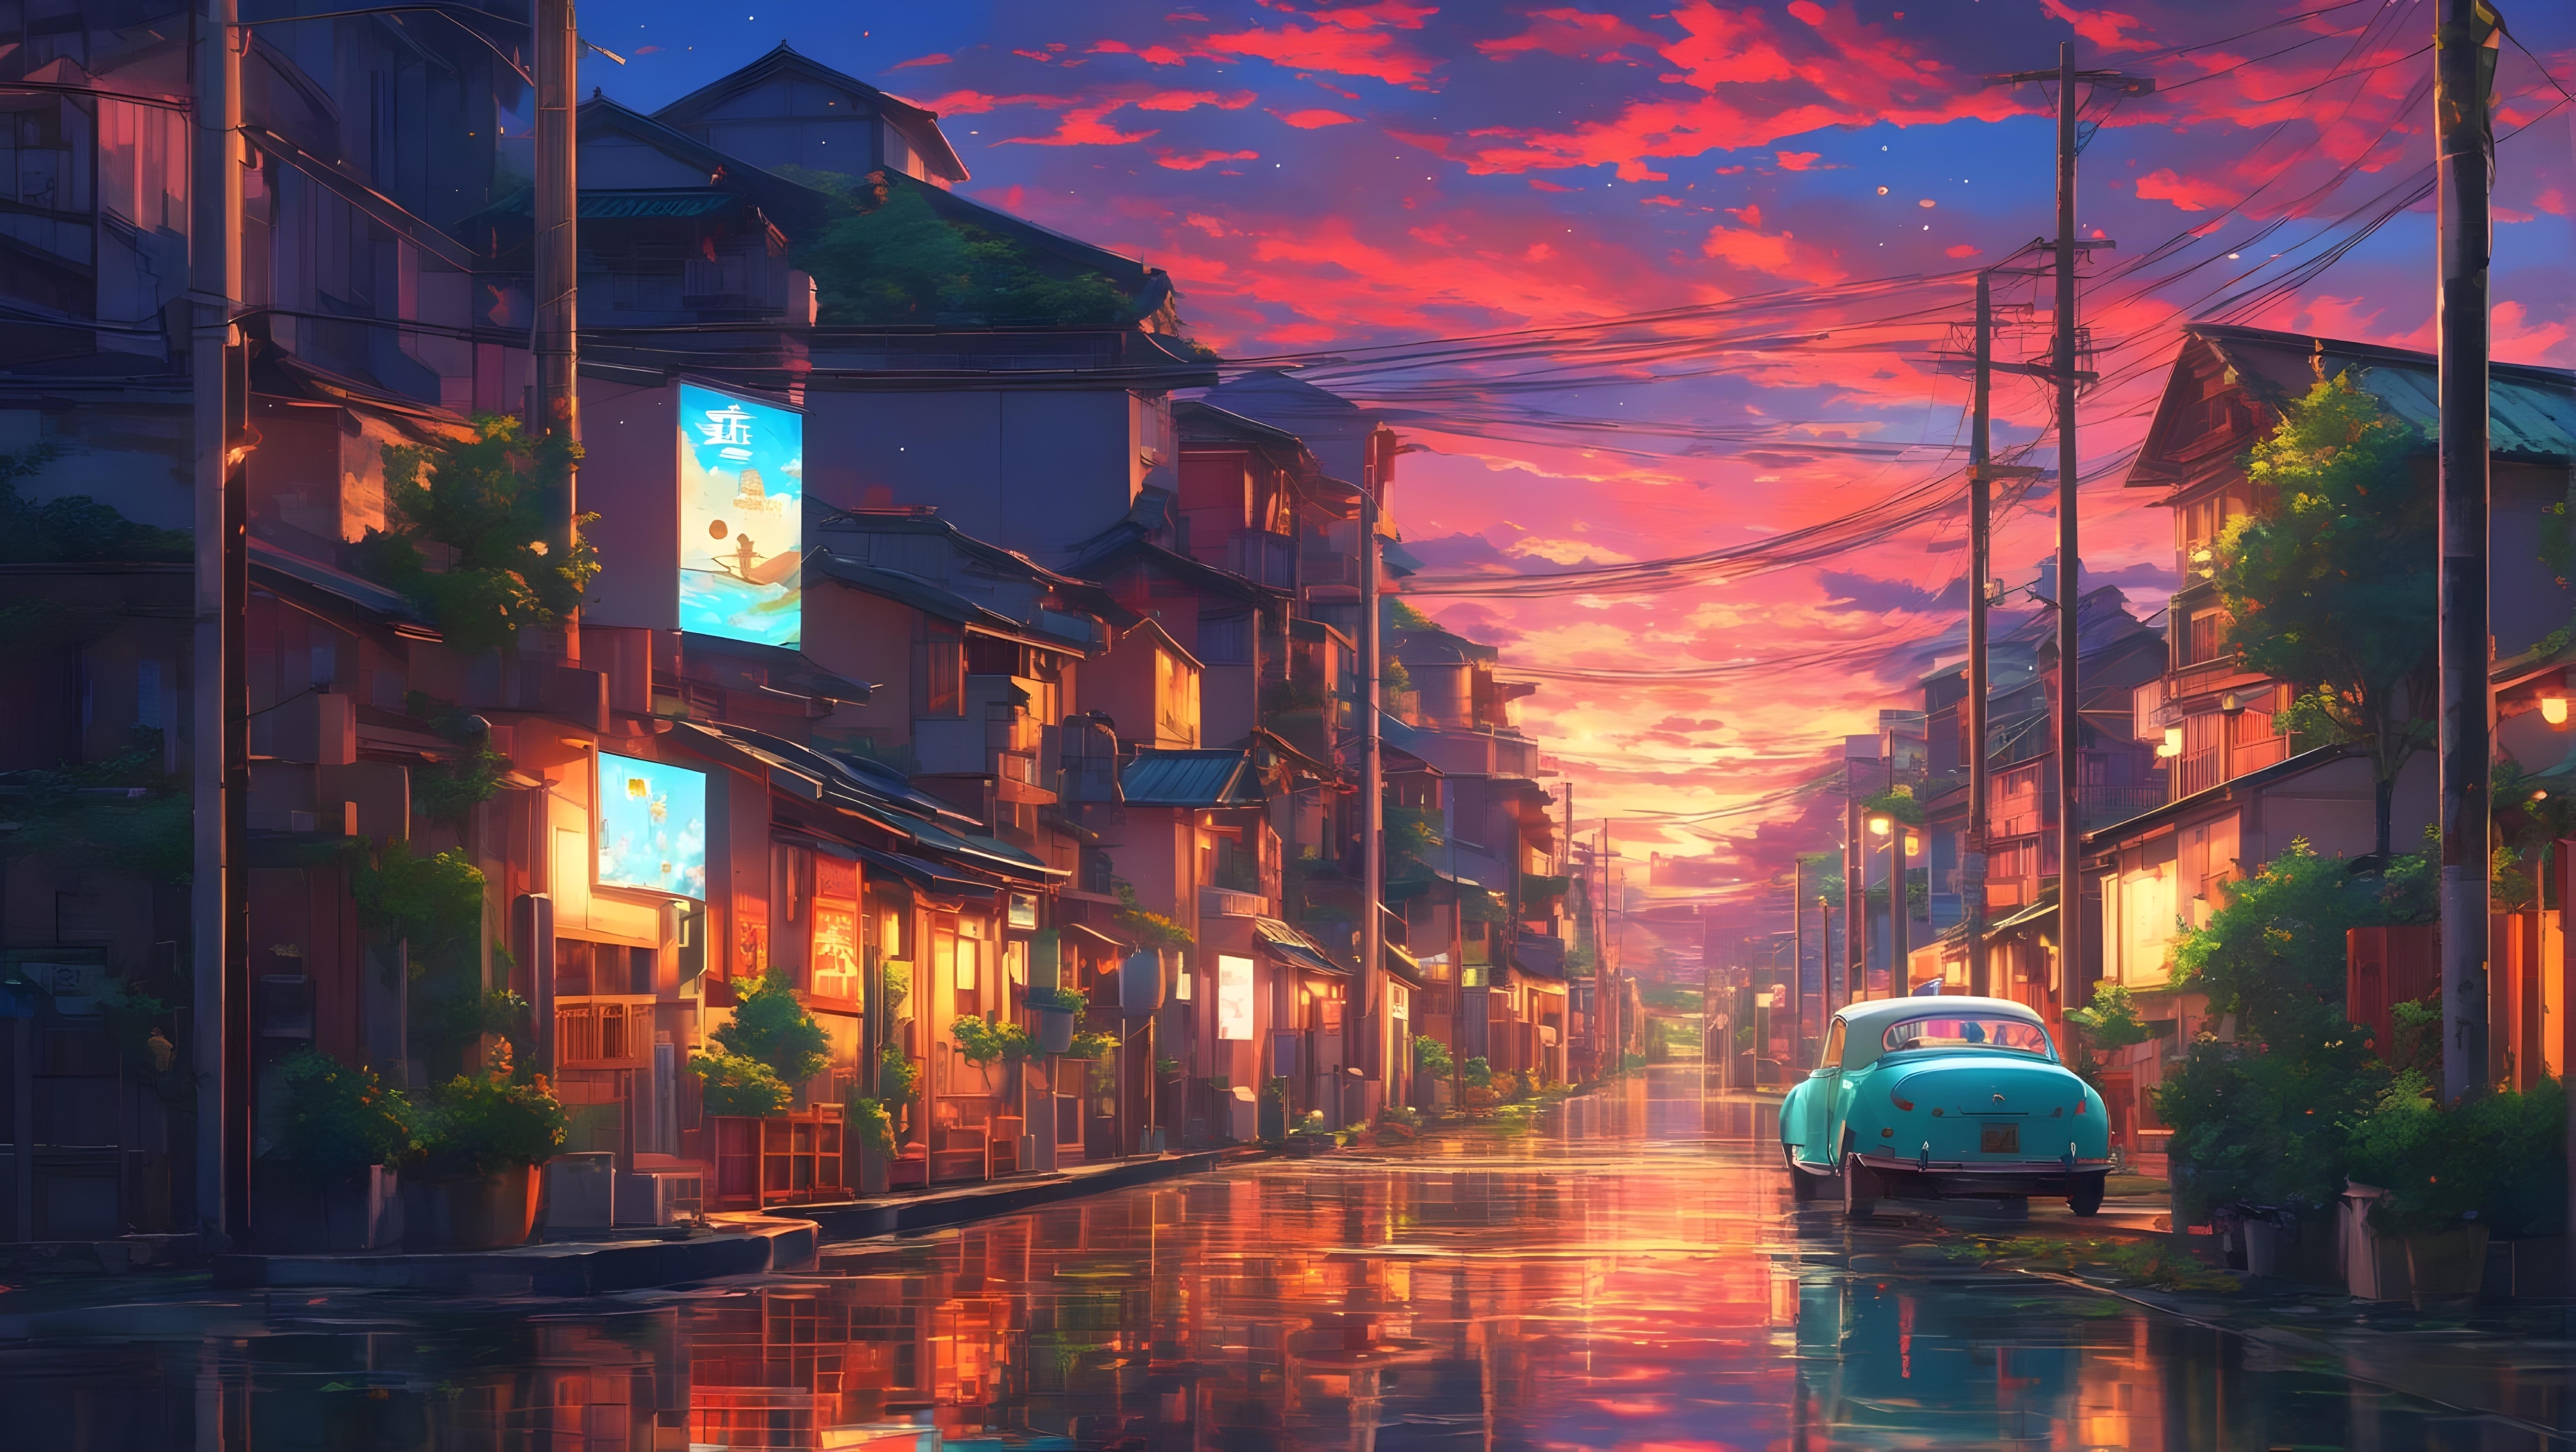 Download Scenic Japanese Anime Street Wallpaper | Wallpapers.com